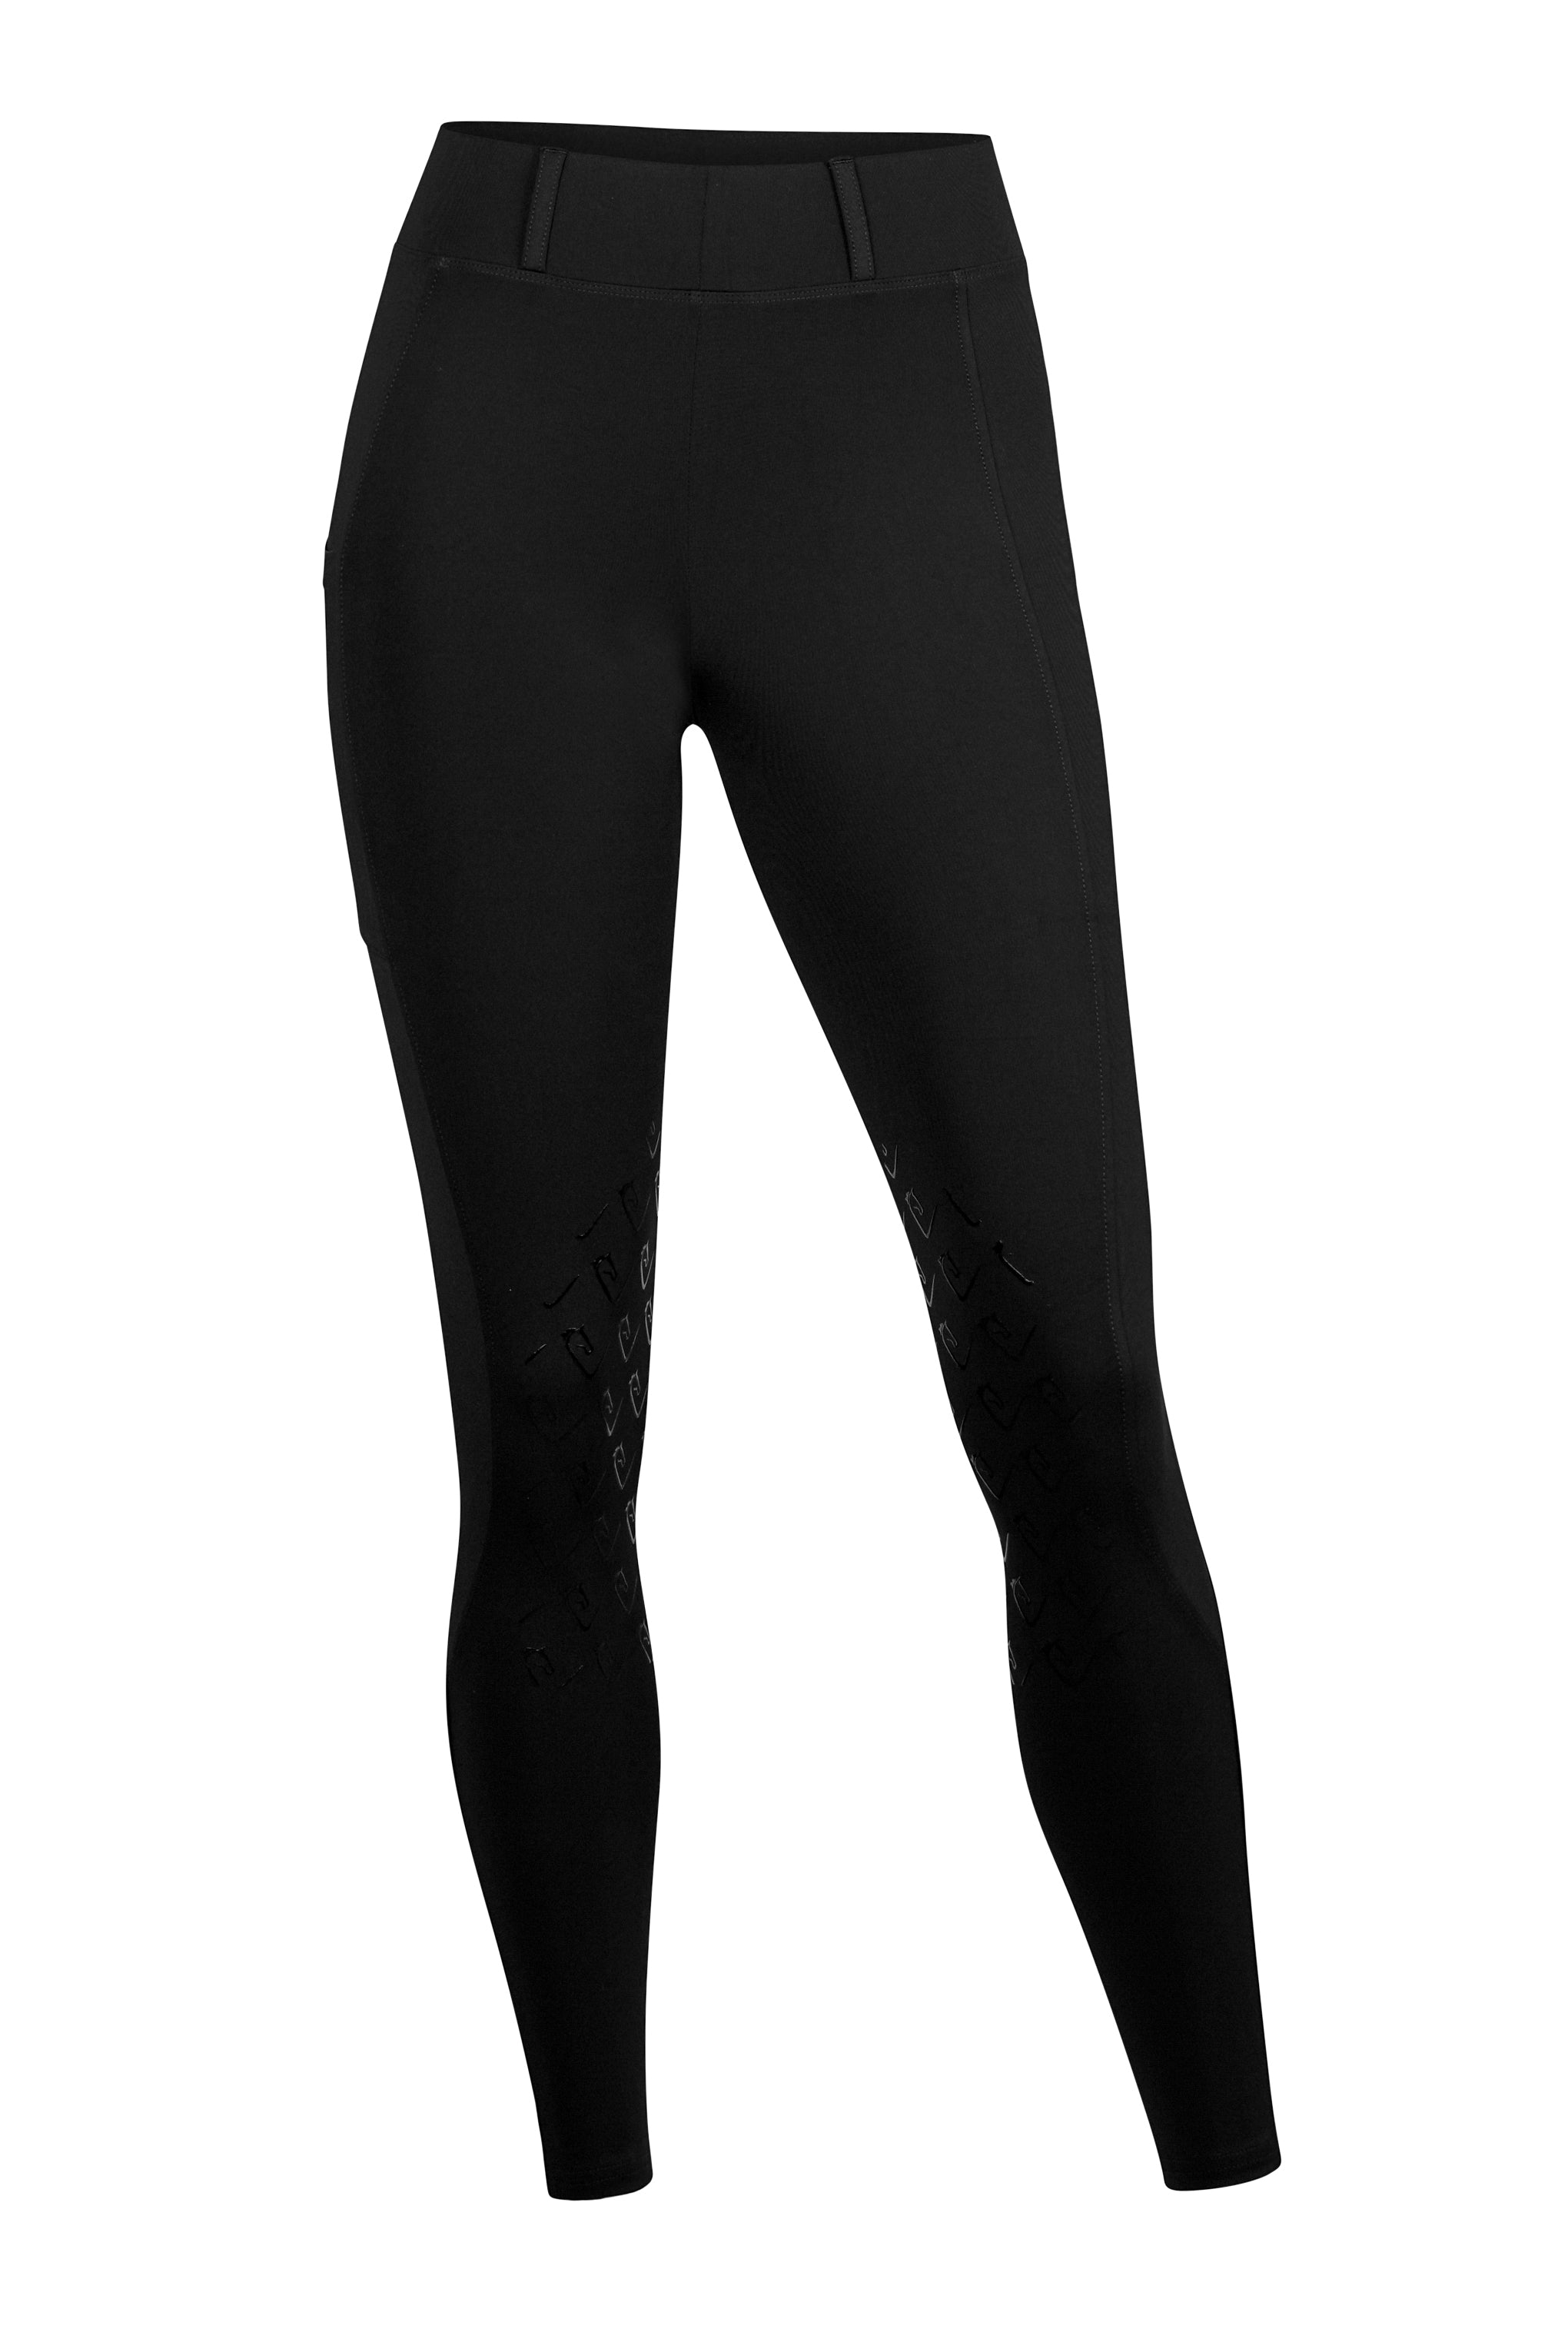 Chacco Recycled Riding Leggings Knee Grip - Black